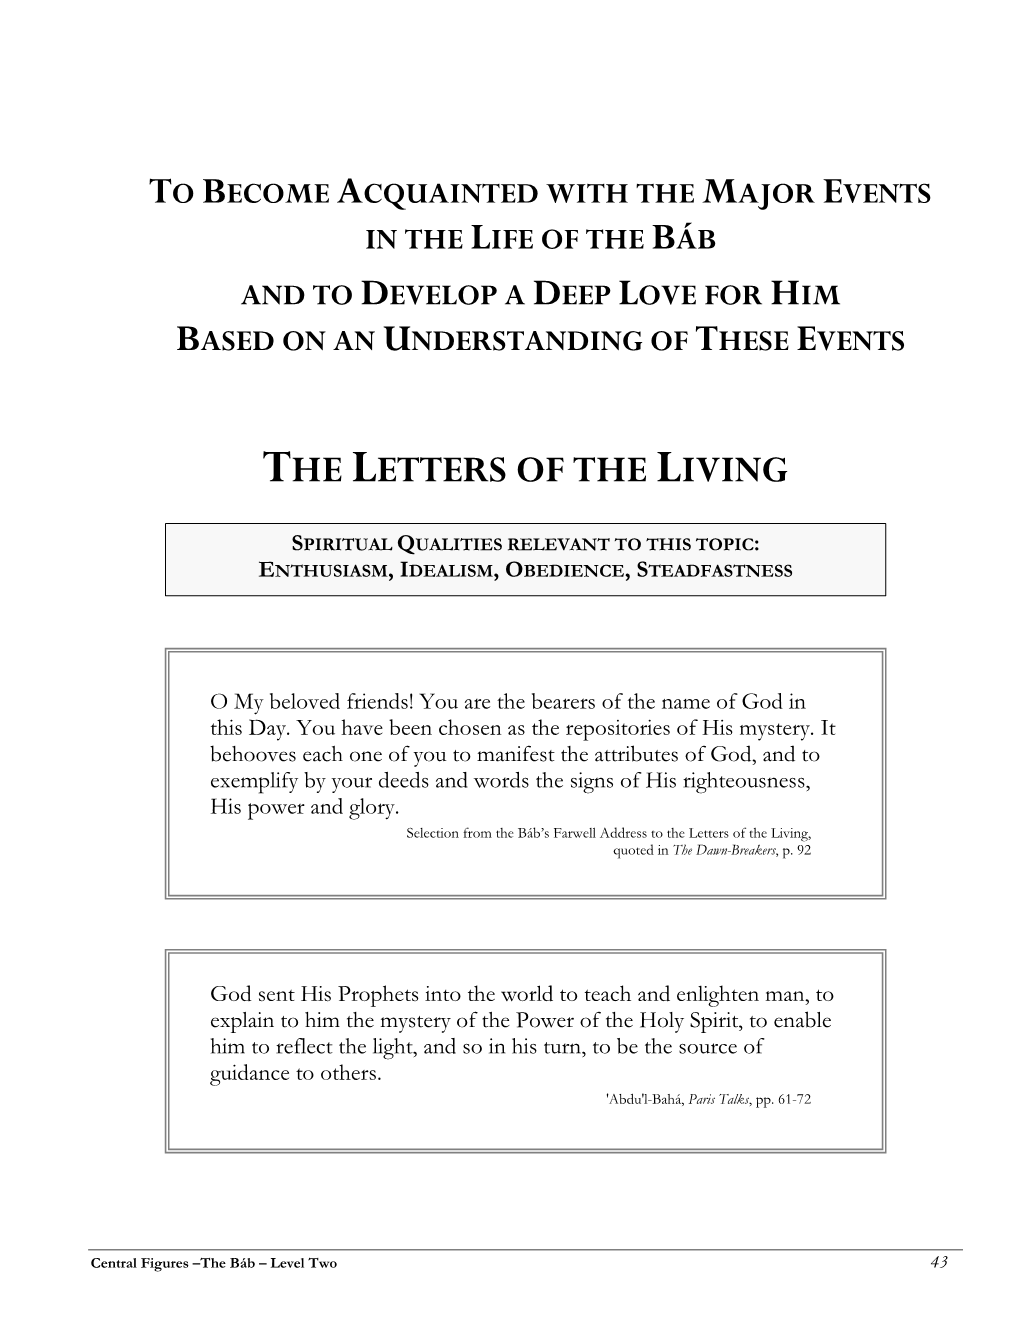 The Letters of the Living